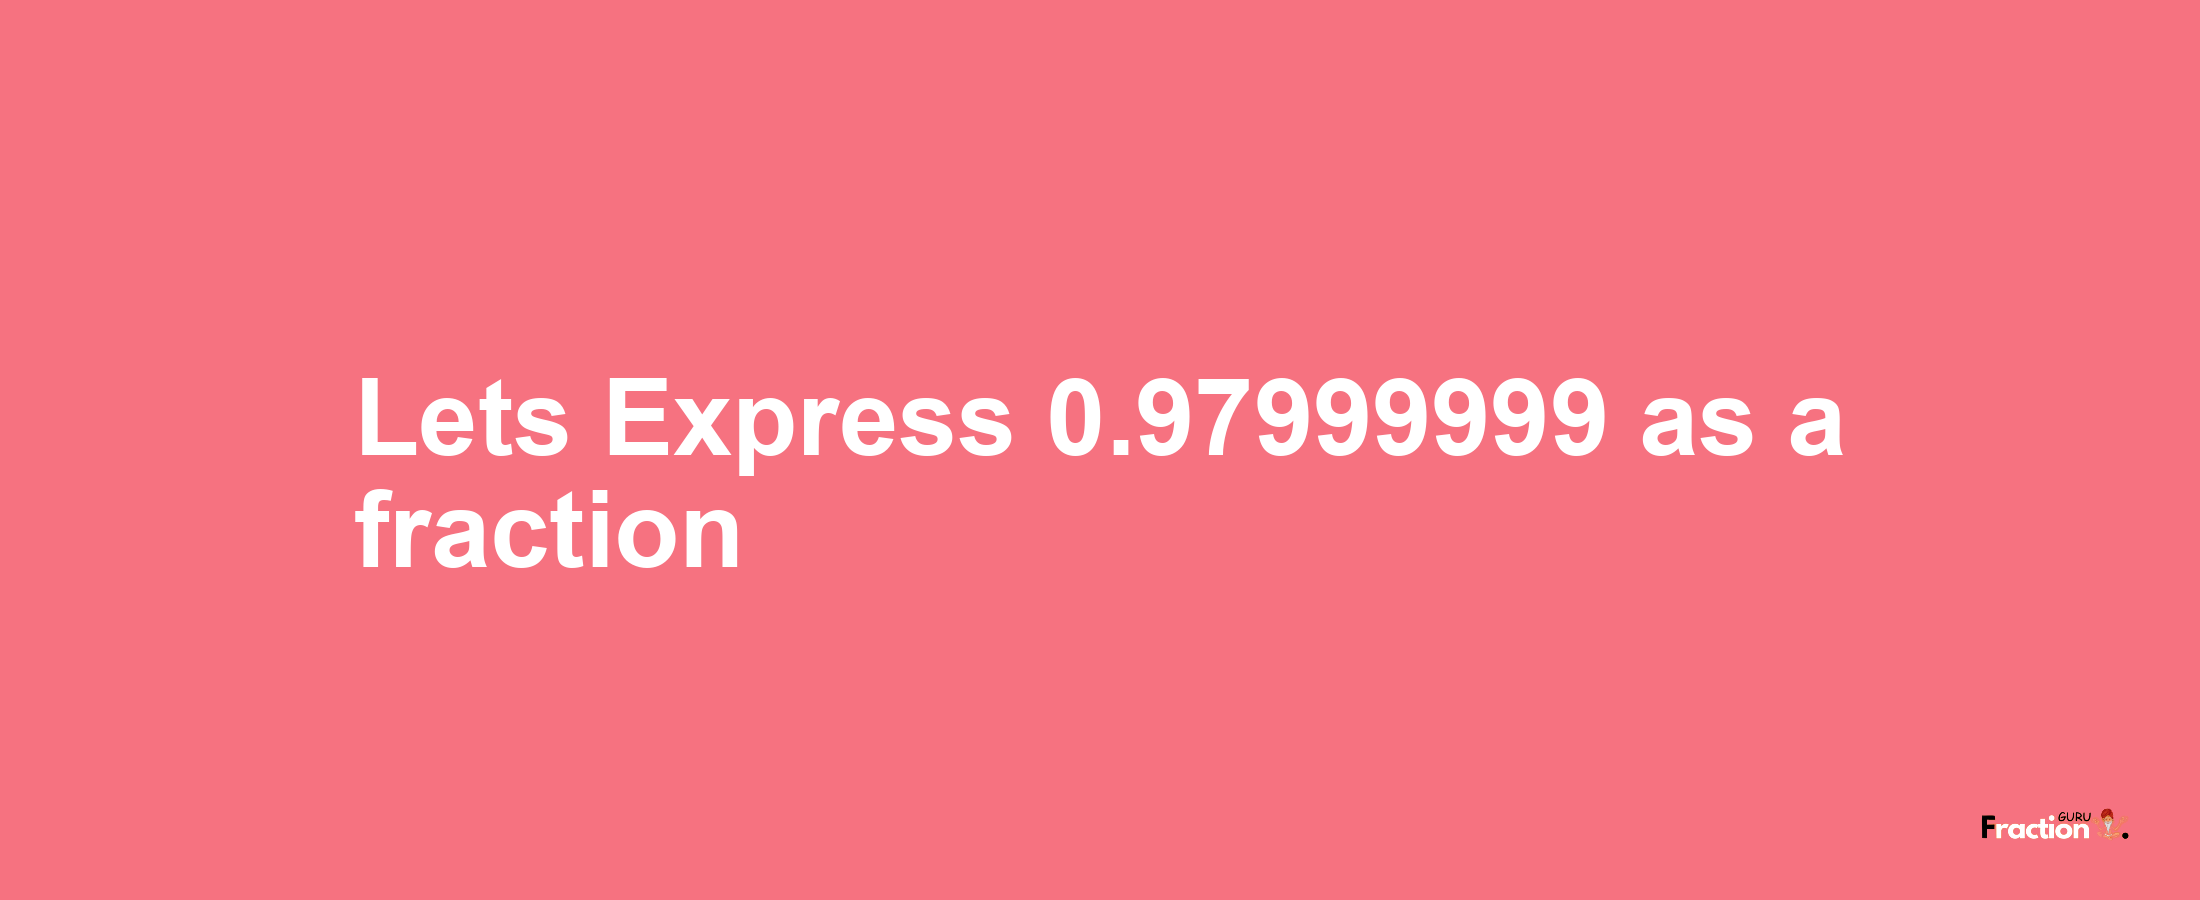 Lets Express 0.97999999 as afraction